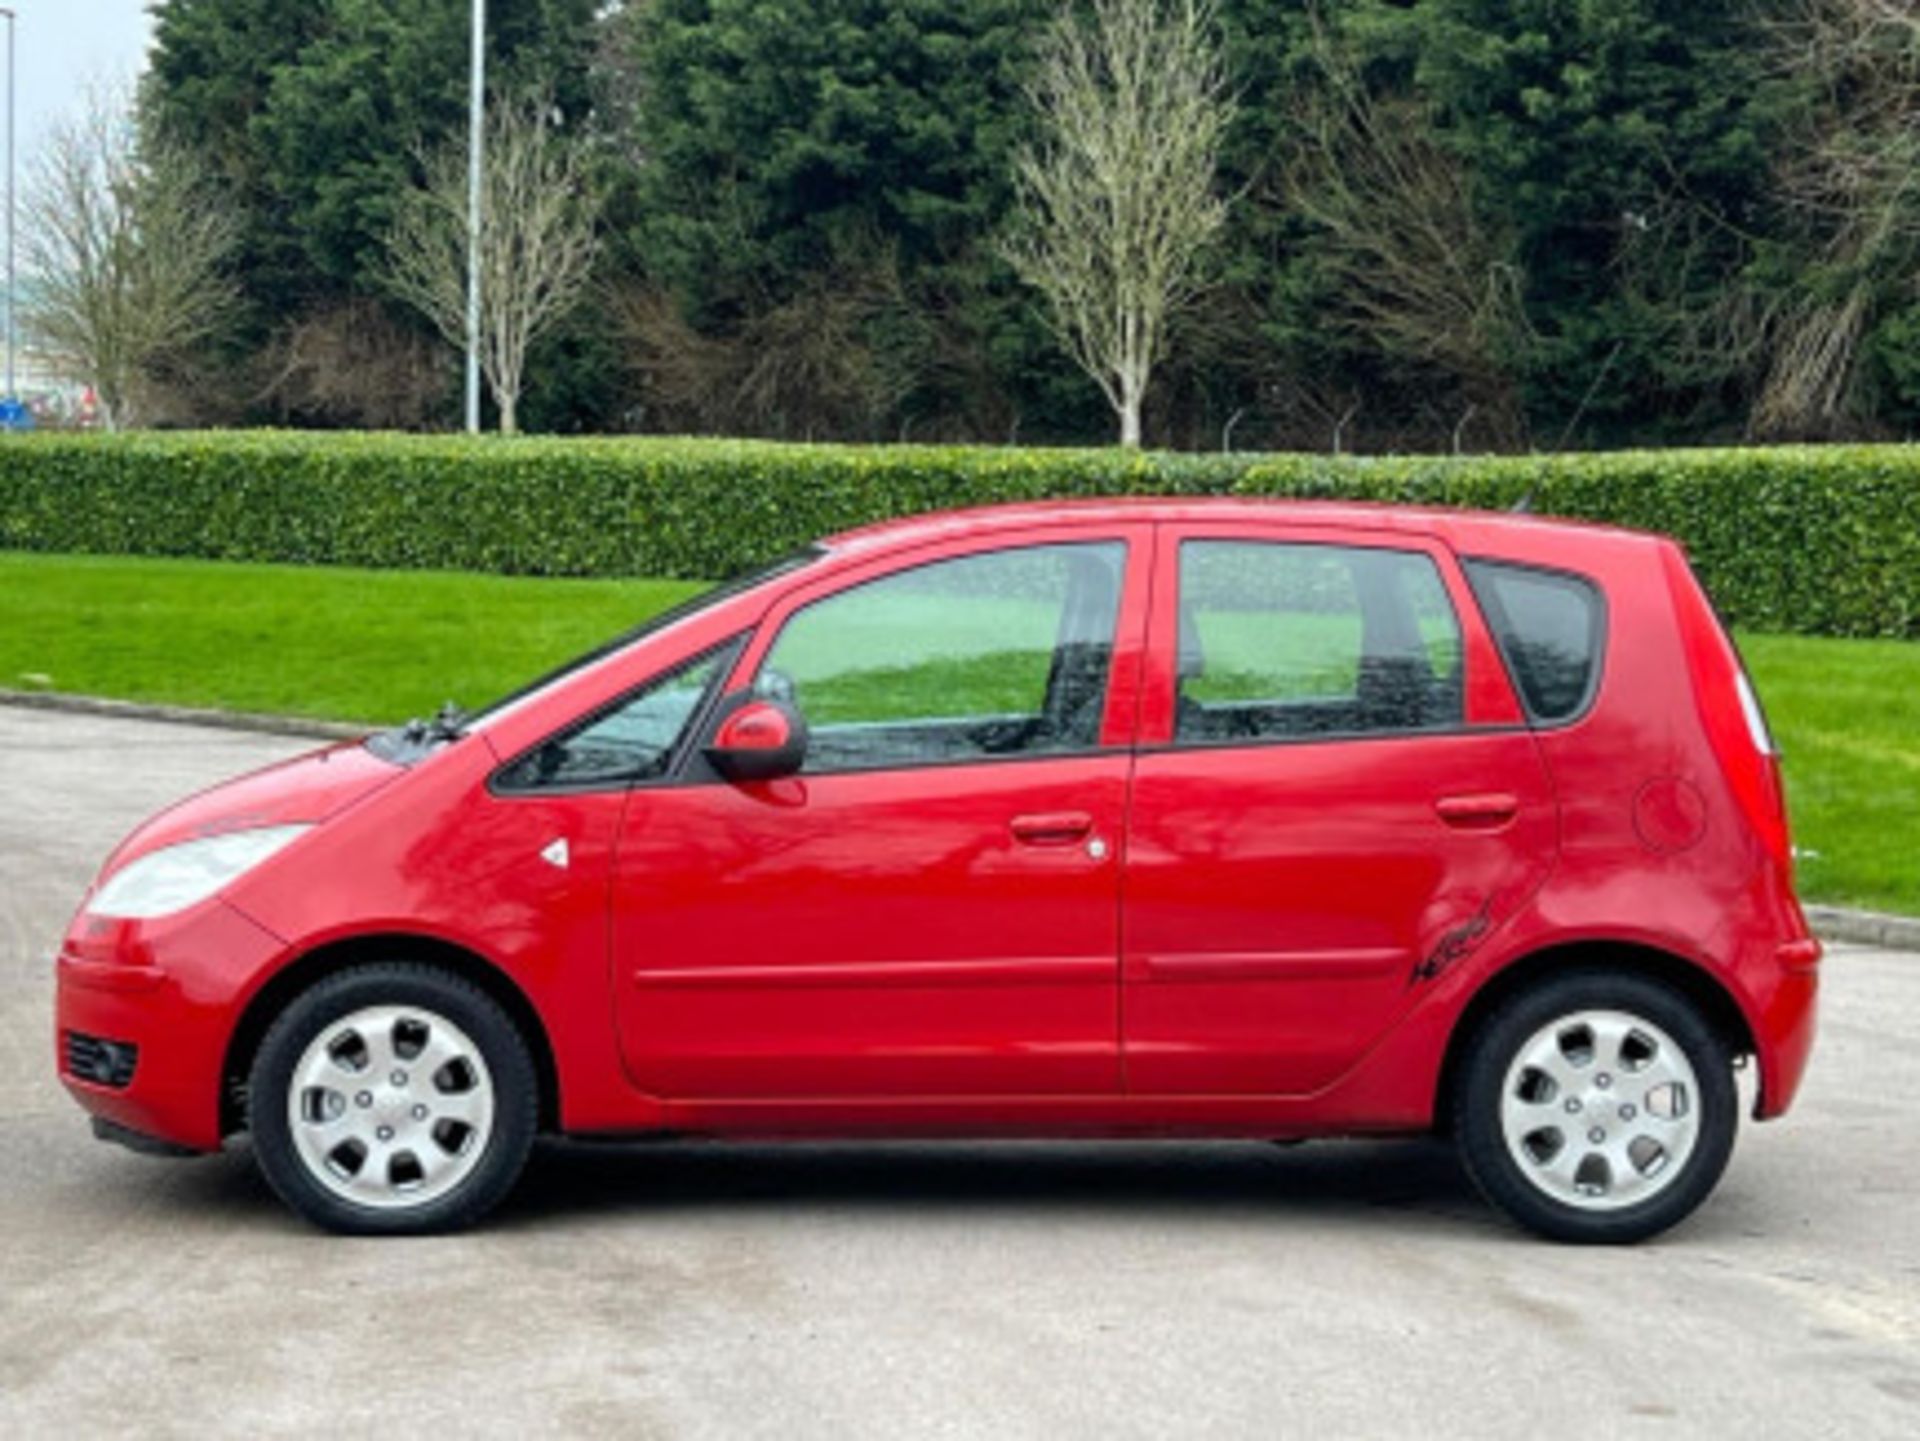 2007 MITSUBISHI COLT 1.5 DI-D DIESEL AUTOMATIC >>--NO VAT ON HAMMER--<< - Image 23 of 191